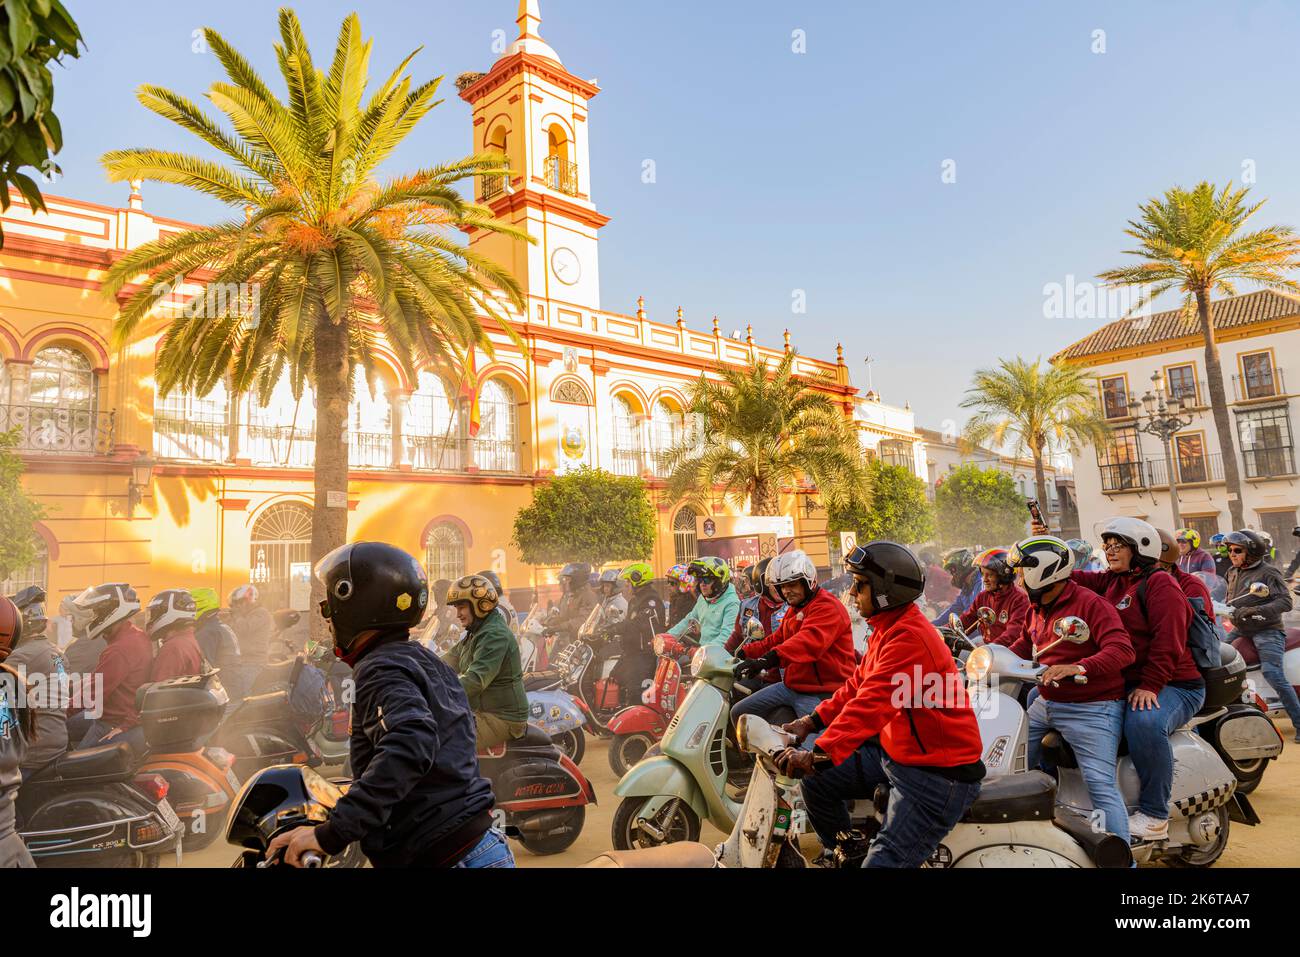 Arahal, Seville.Spain. October 15, 2022. In October, "El Avispero" (The Wasp's Nest) is held in Arahal (Seville). A meeting of Vespa scooter enthusias Stock Photo